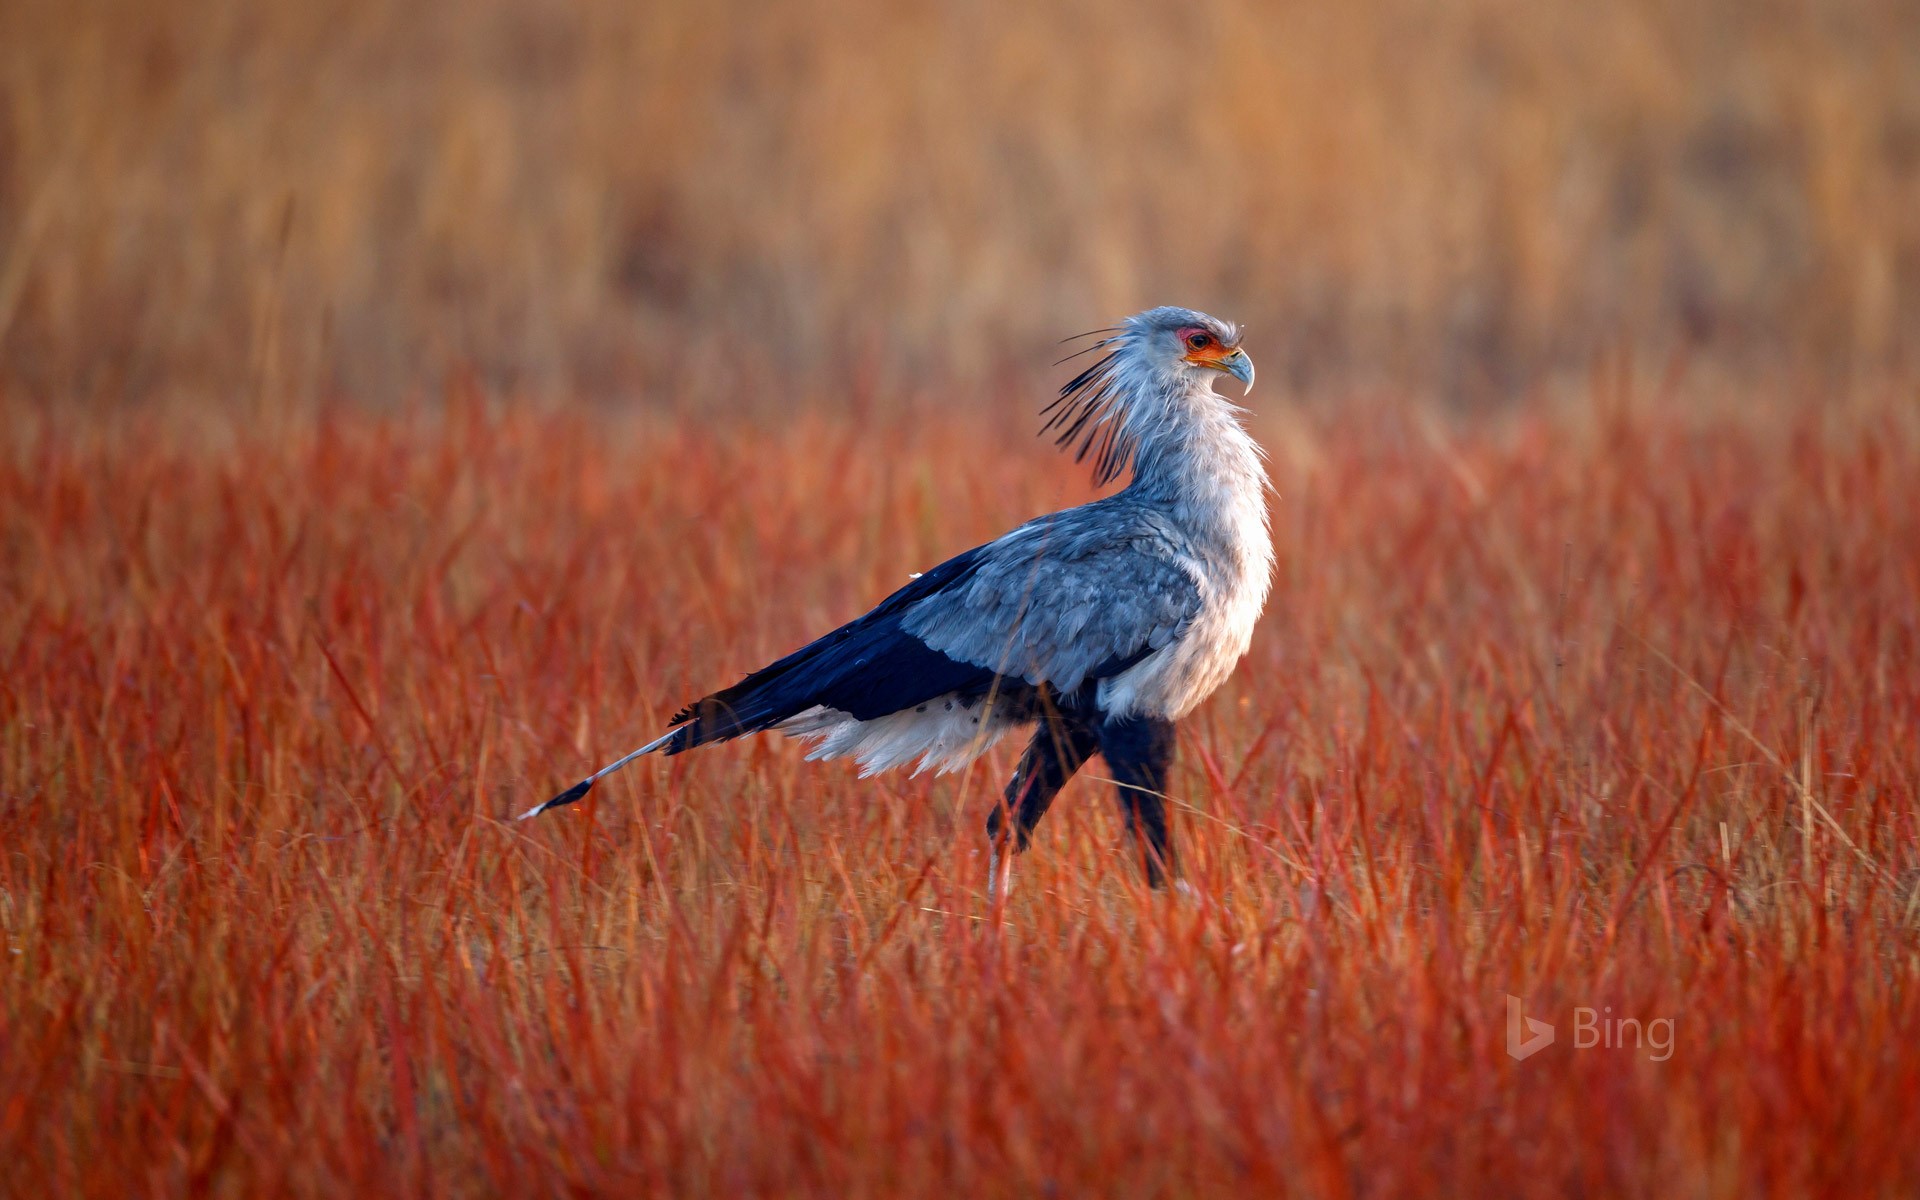 Secretarybird hunting for food in Rietvlei Nature Reserve, South Africa